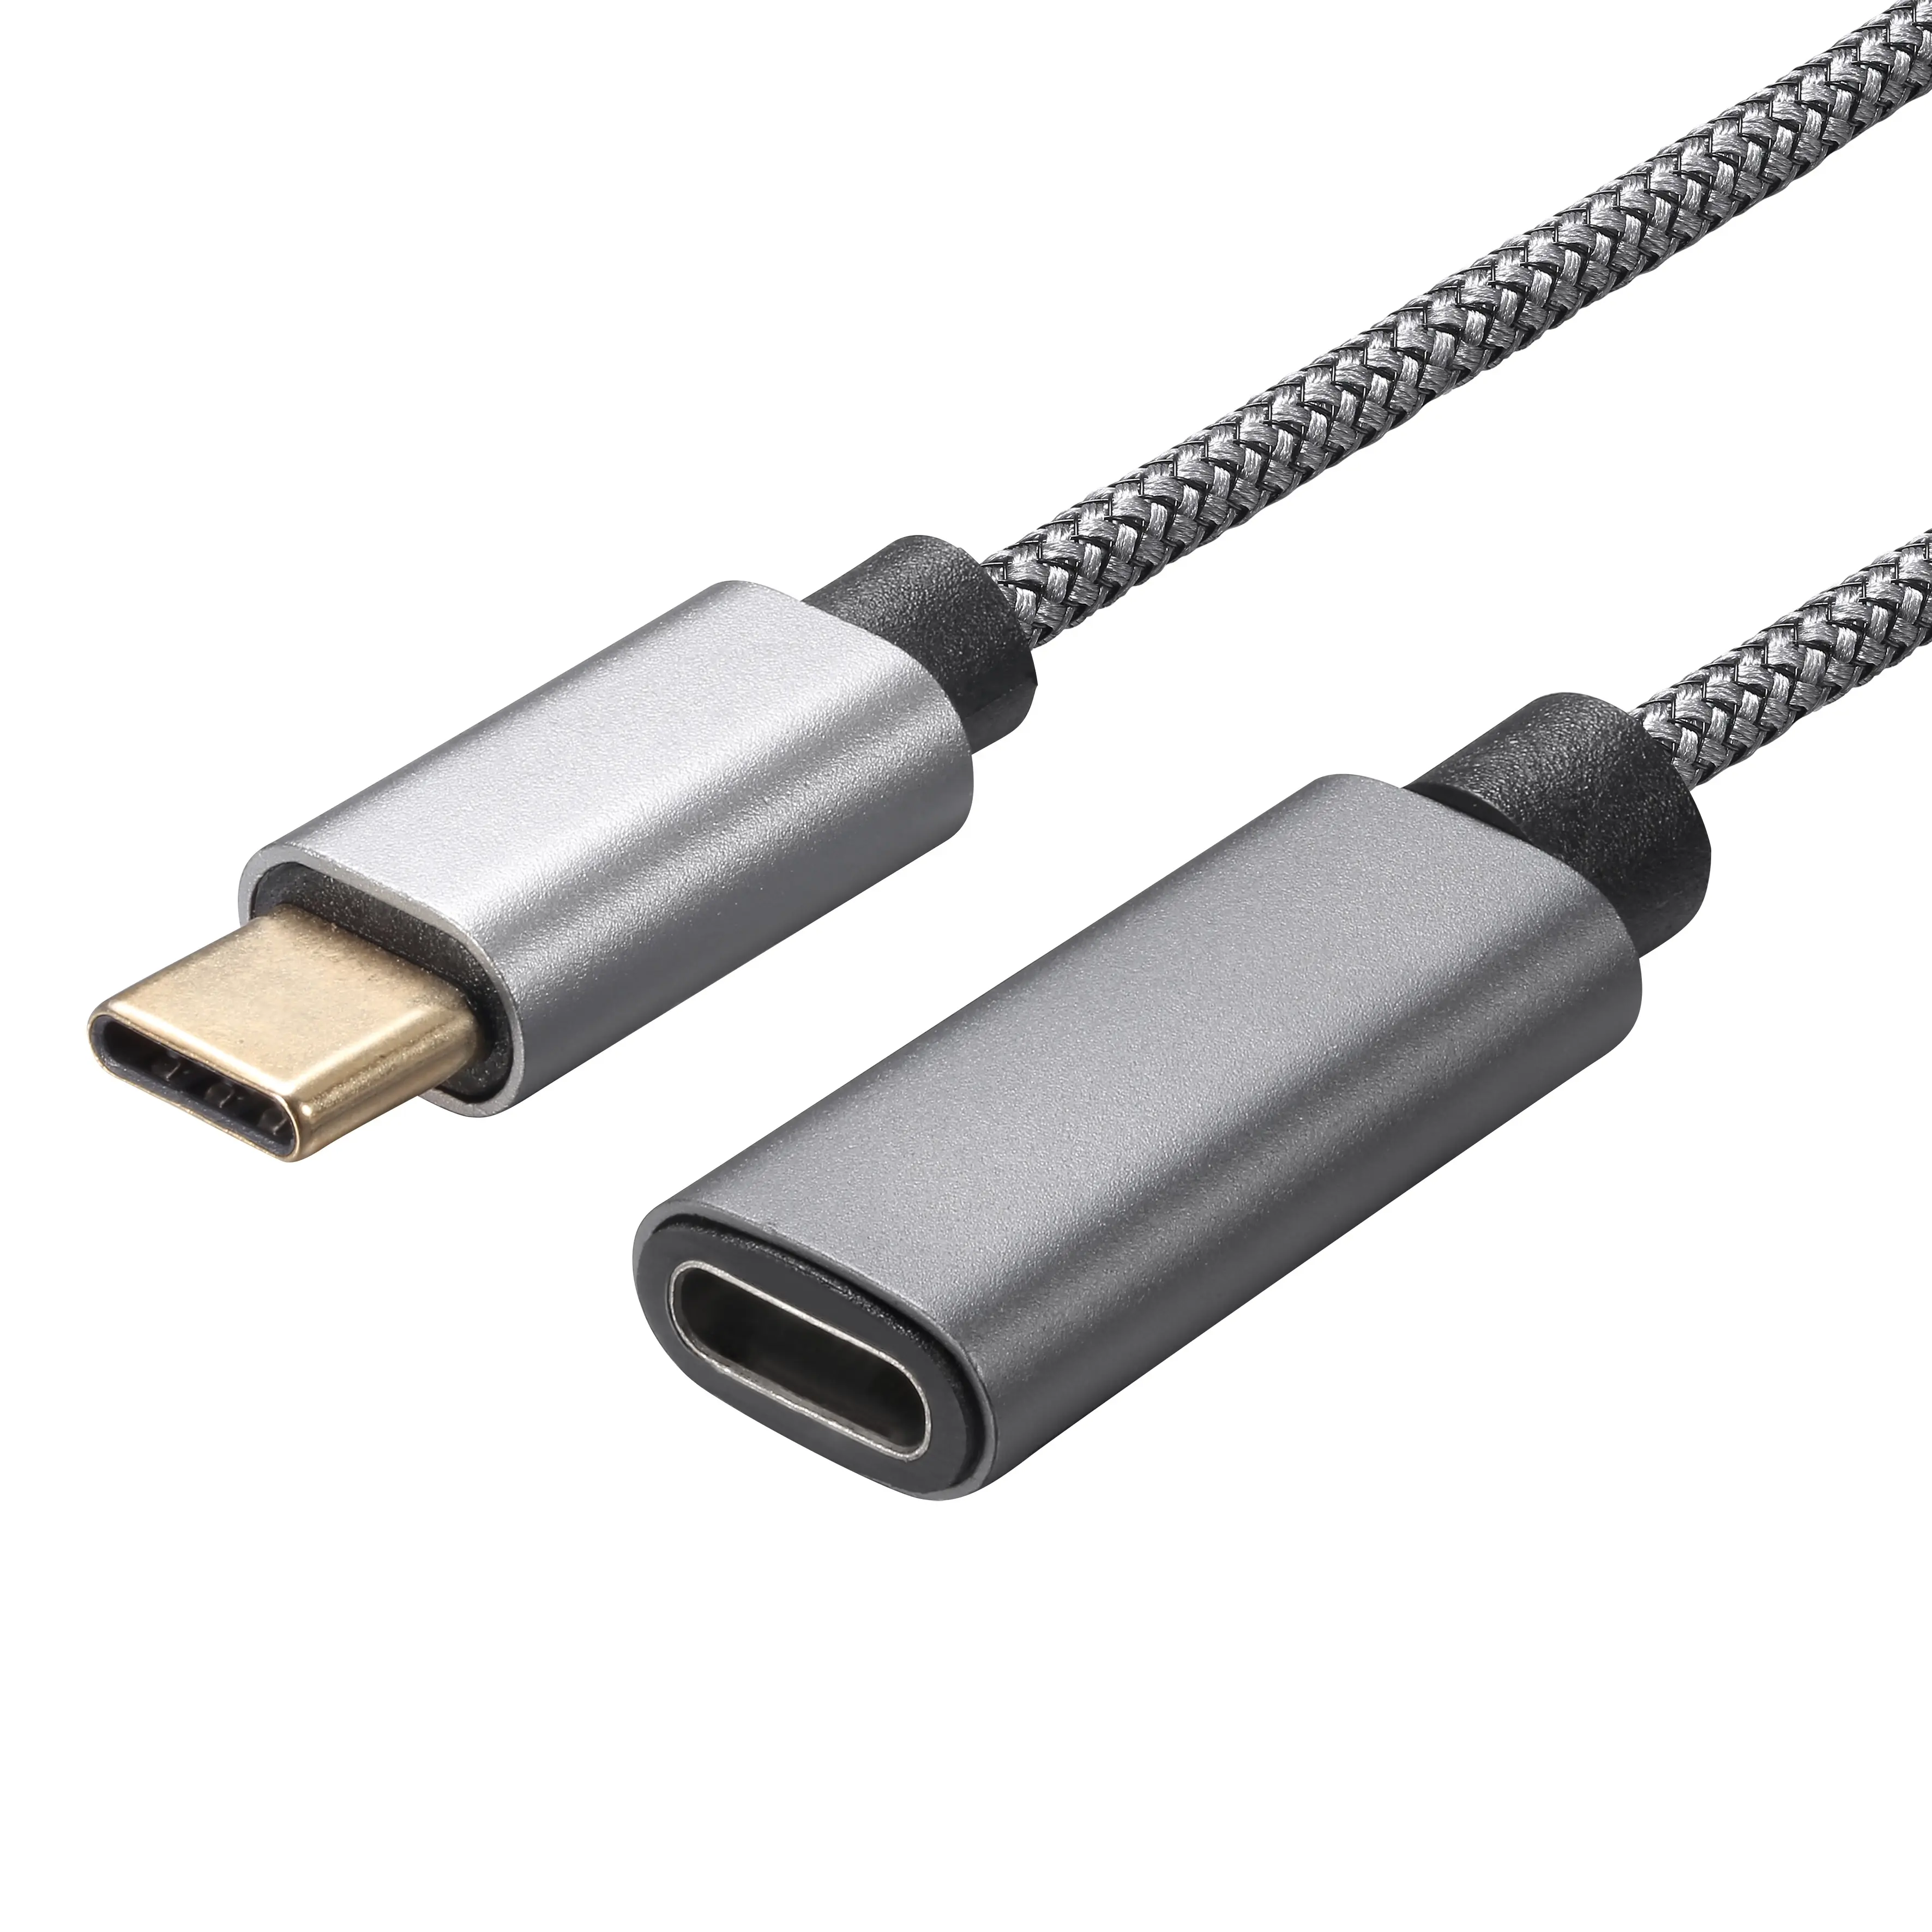 Amazon Hotsale Oem Usb Type C Male To Female Extension Cable ,Durable Model